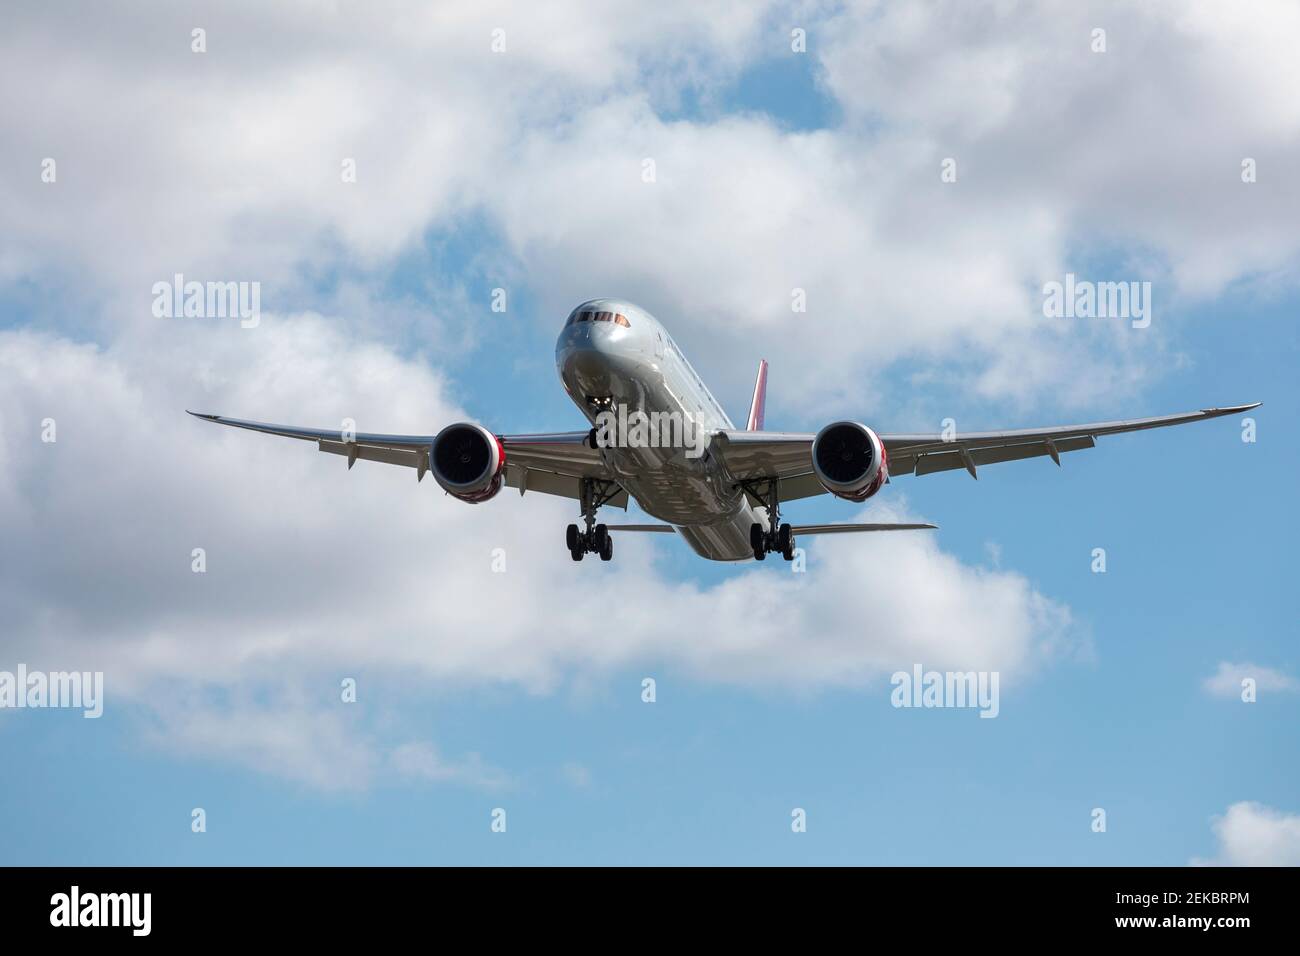 Commercial airplane preparing to land Stock Photo